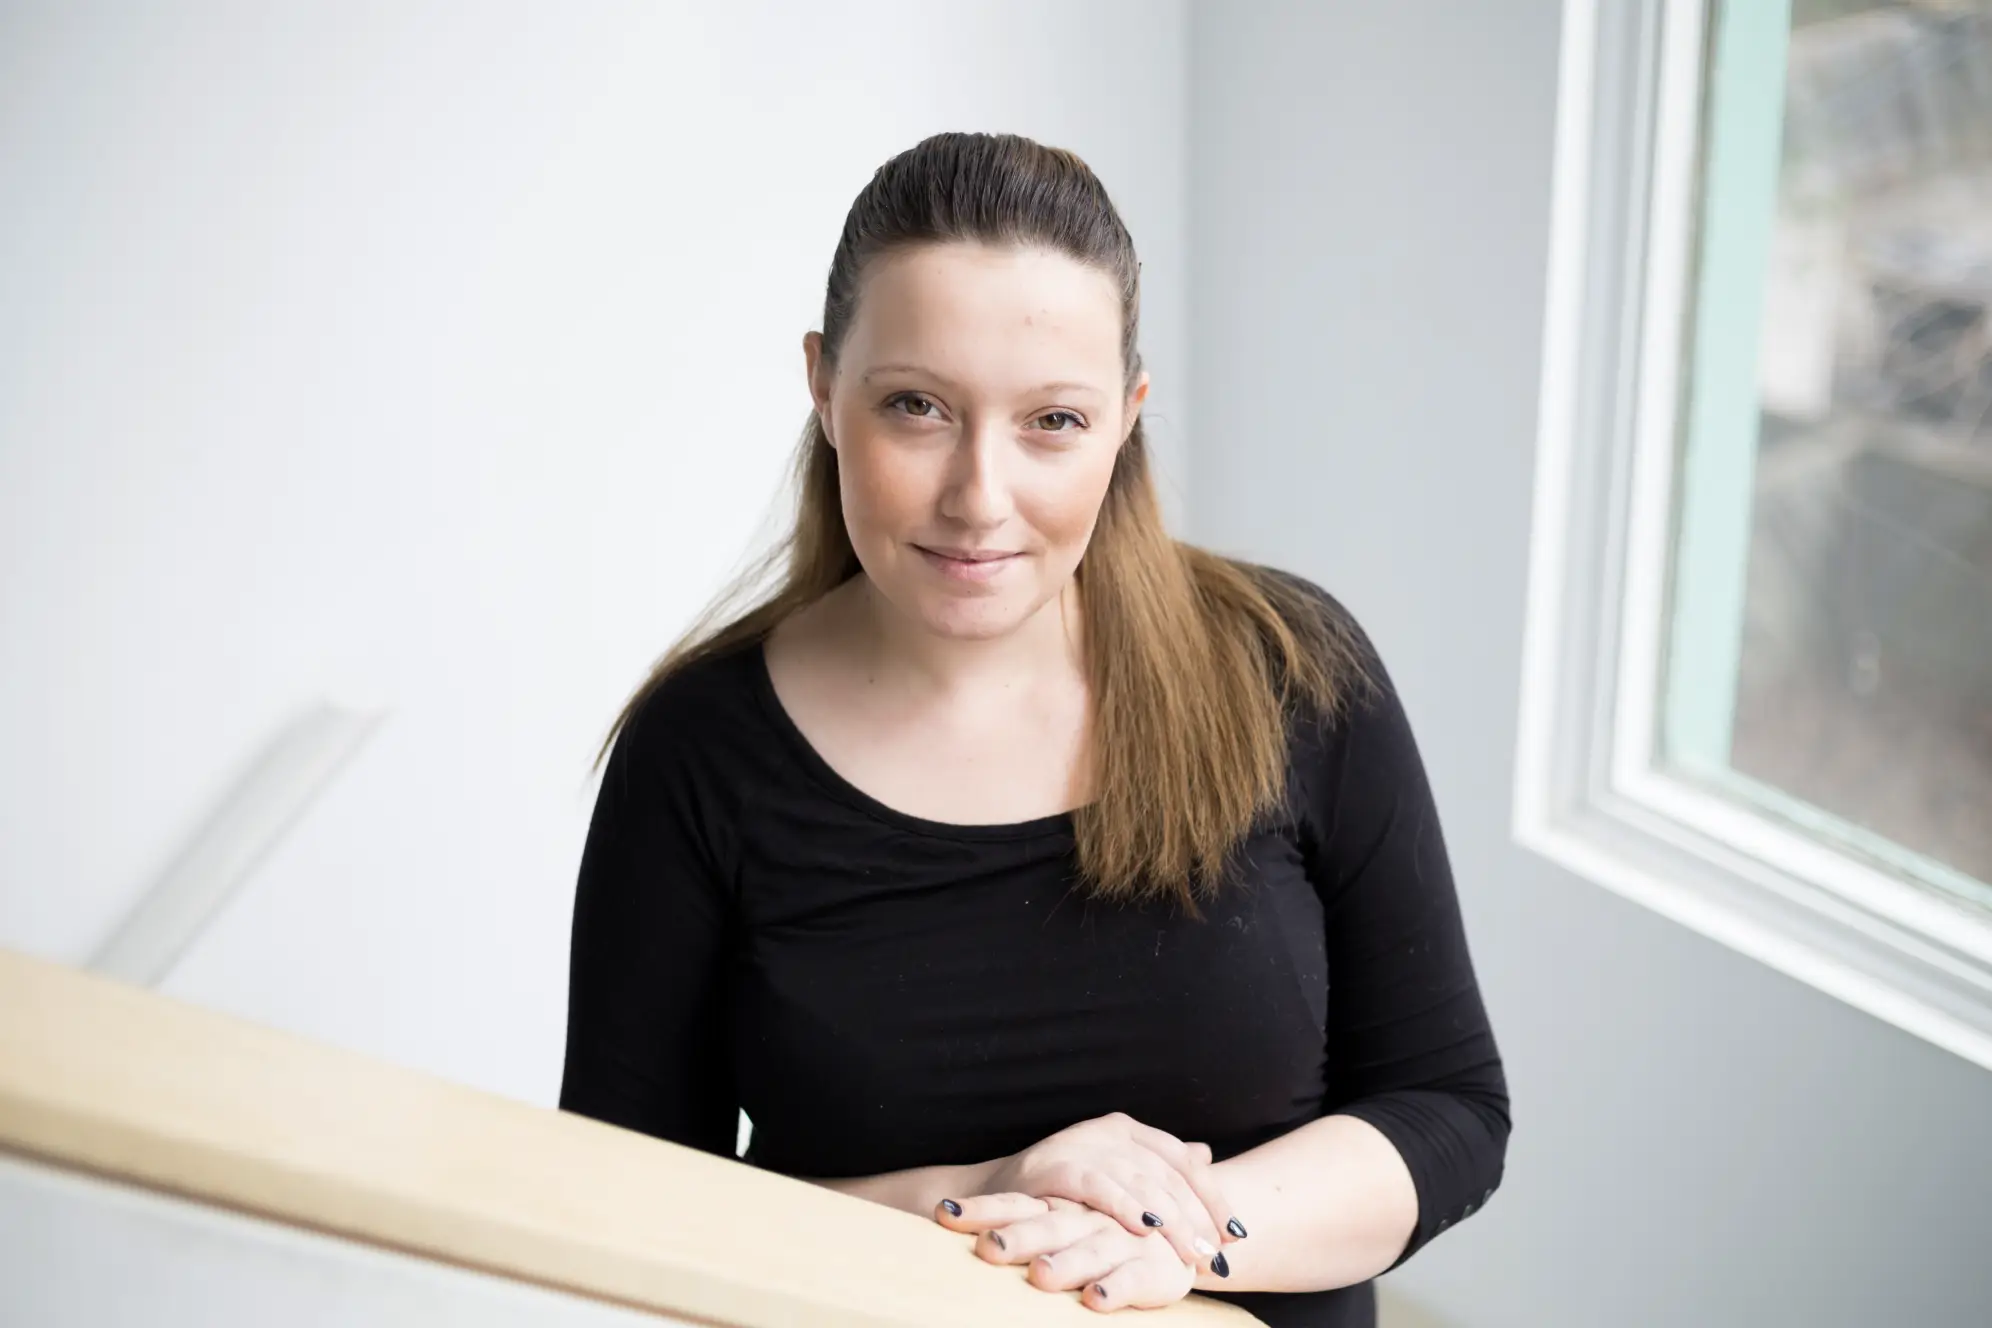 Woman standing on white staircase wearing black shirt and smiling